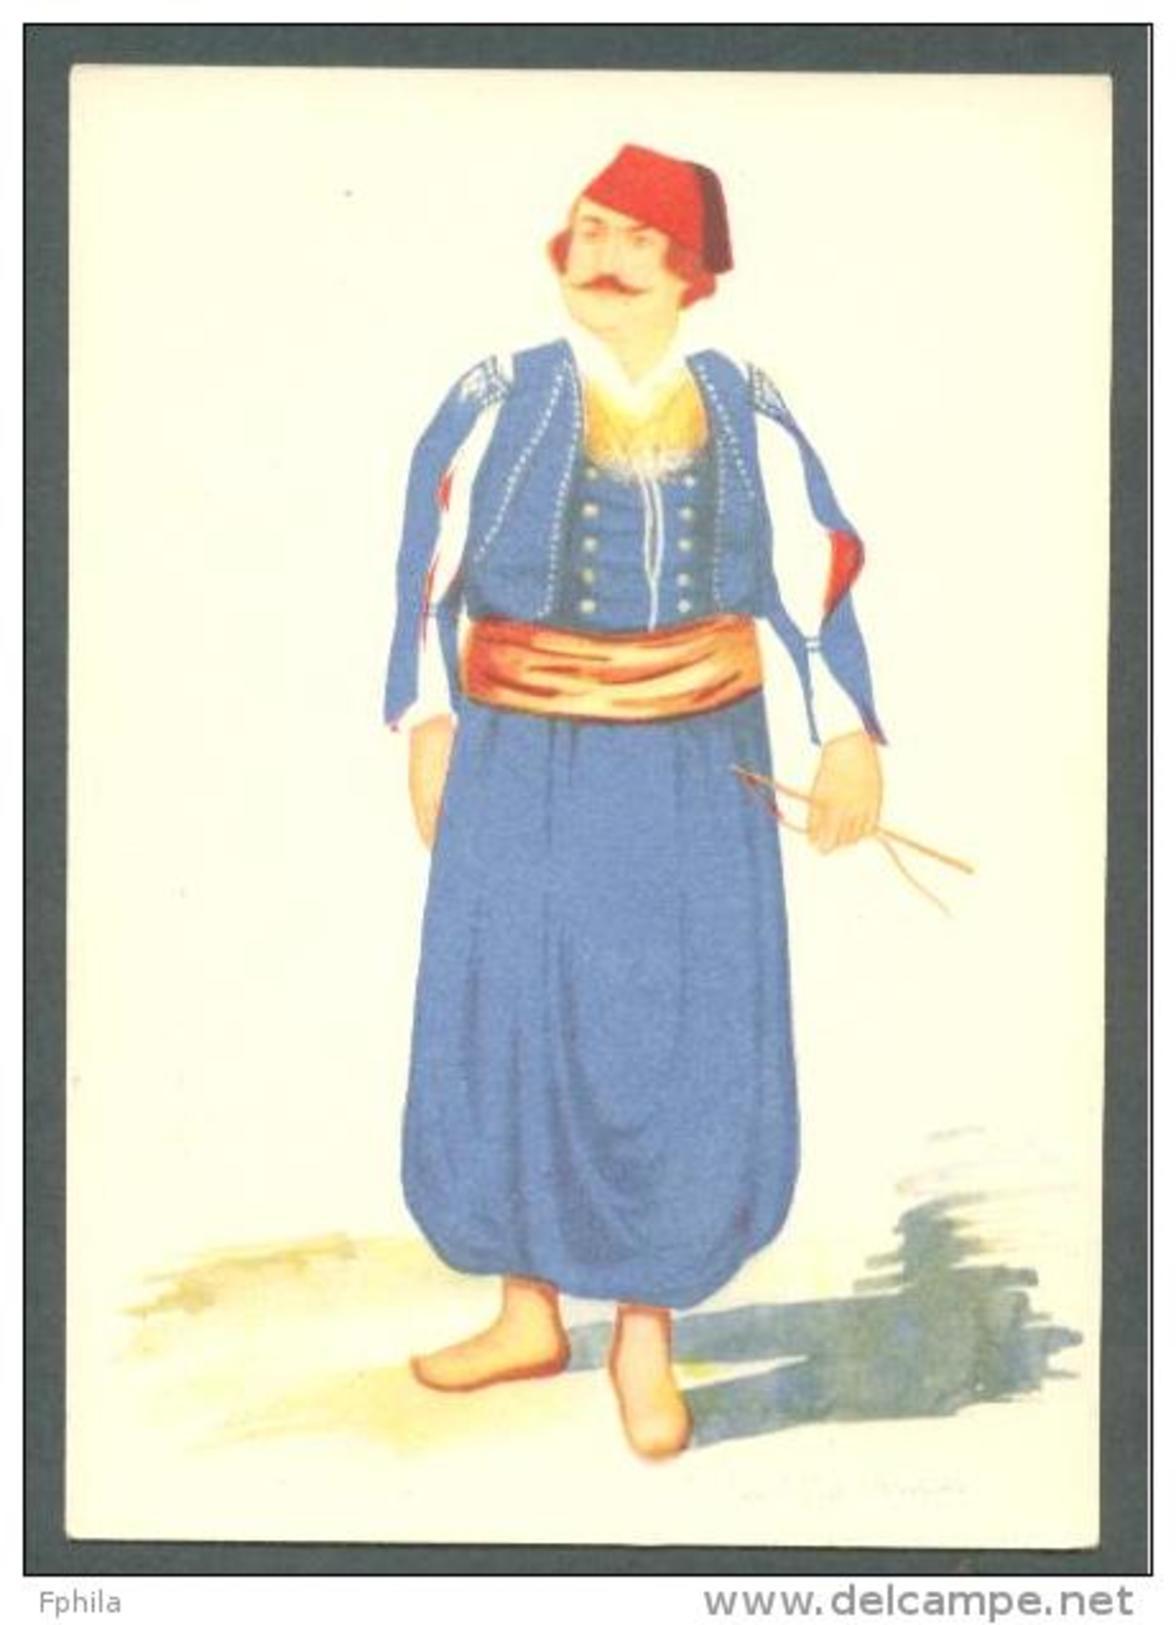 TURKEY OTTOMAN YOUNG OSMAN MAIL CARRIER - POSTMAN IN 1856 POSTCARD UNUSED - Postal Stationery